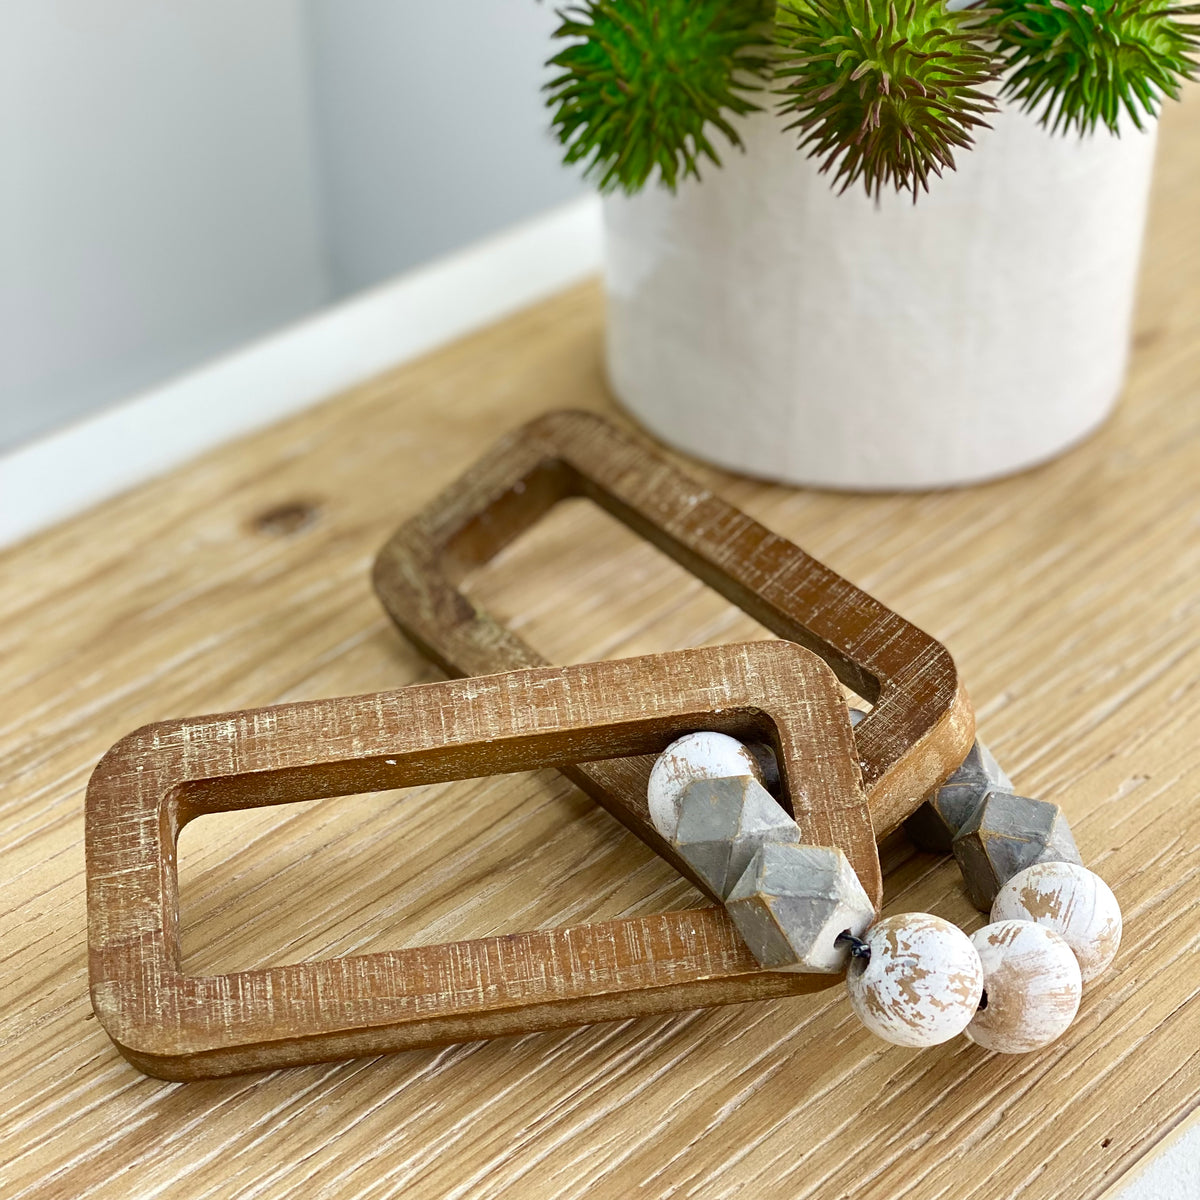 Wooden Link and Beads Decor